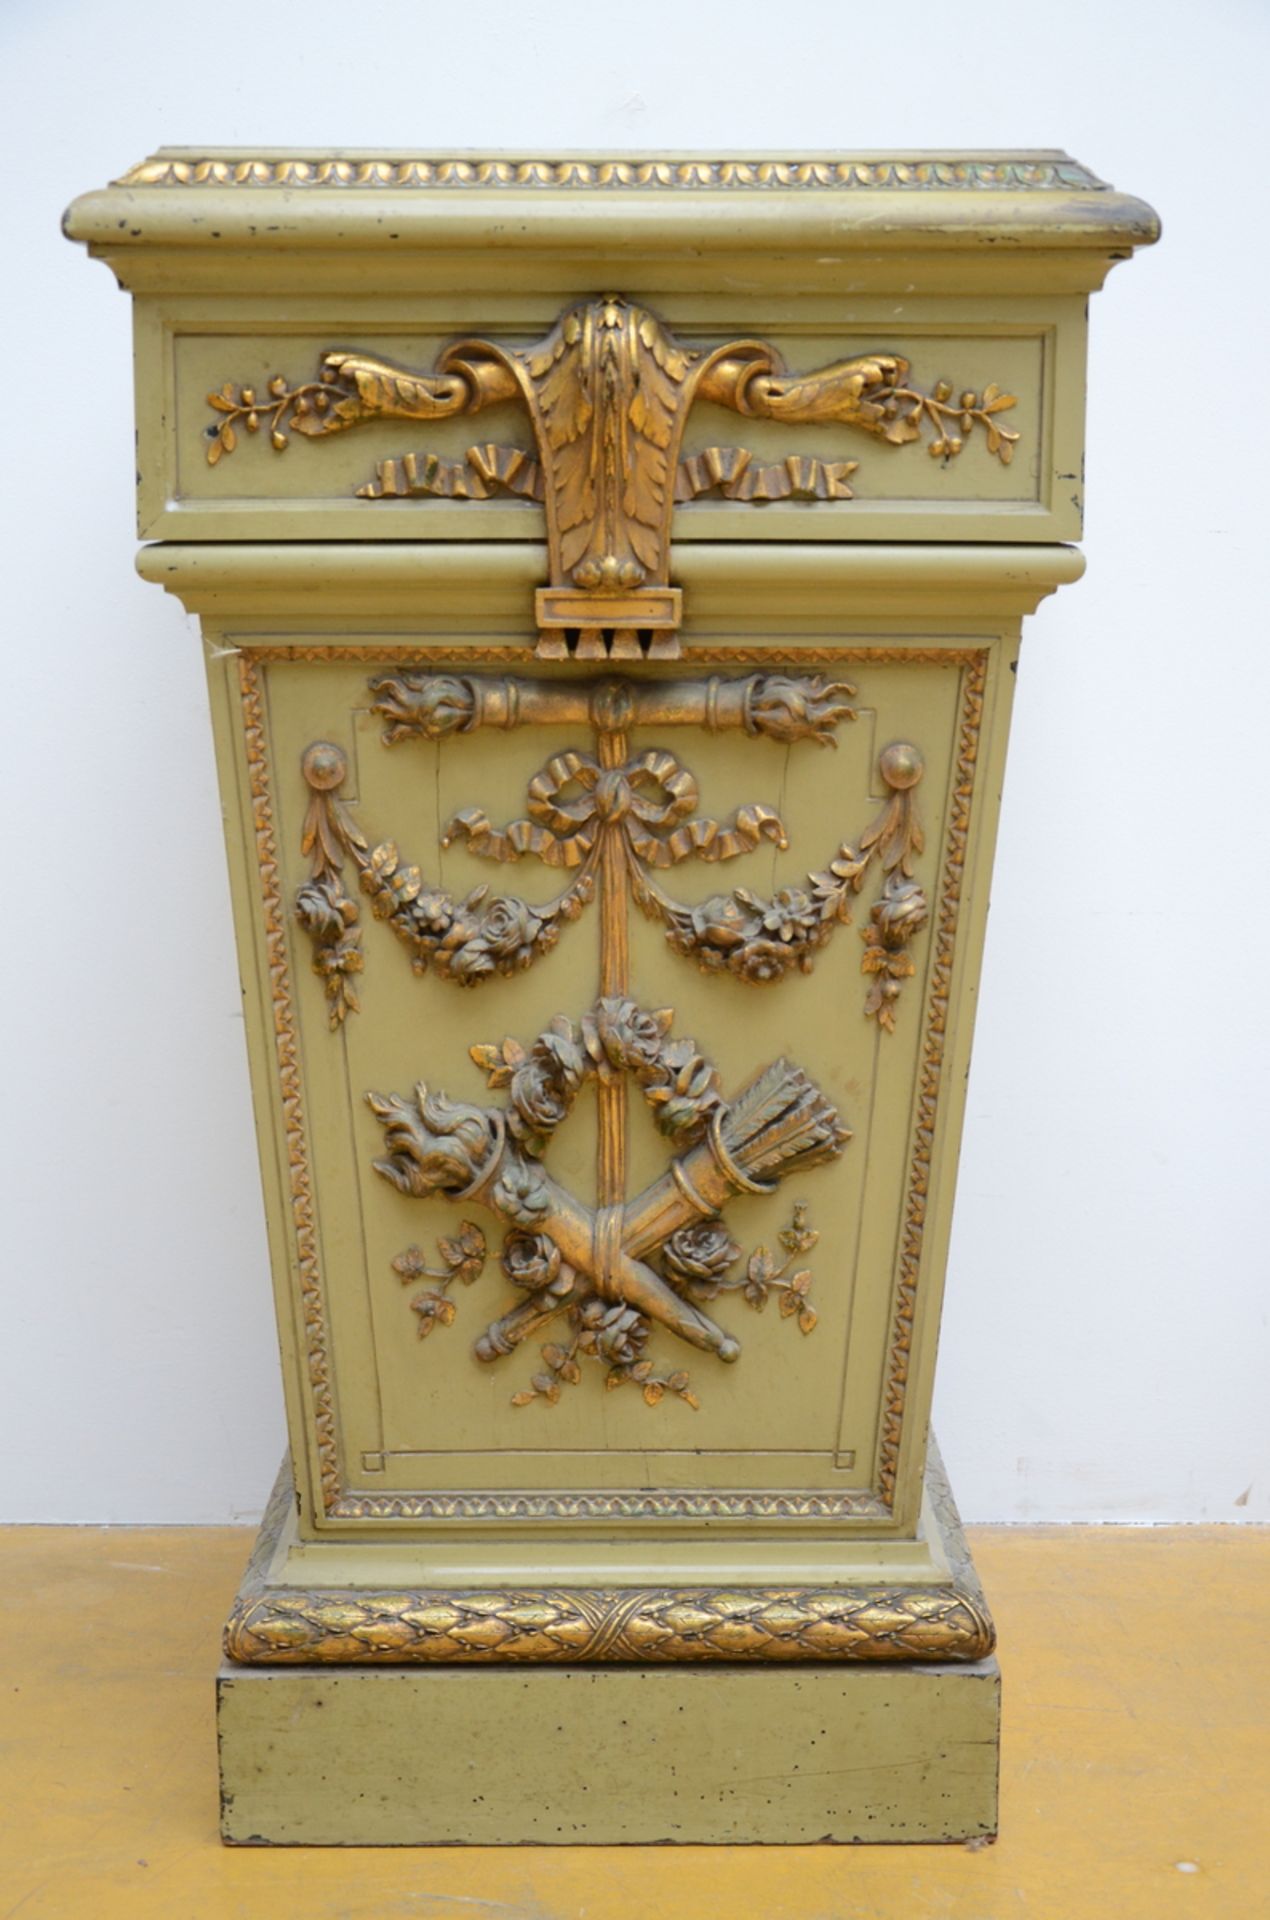 Lot: a square and a round pedestal in painted wood (h 60 - 85 cm) - Image 2 of 5